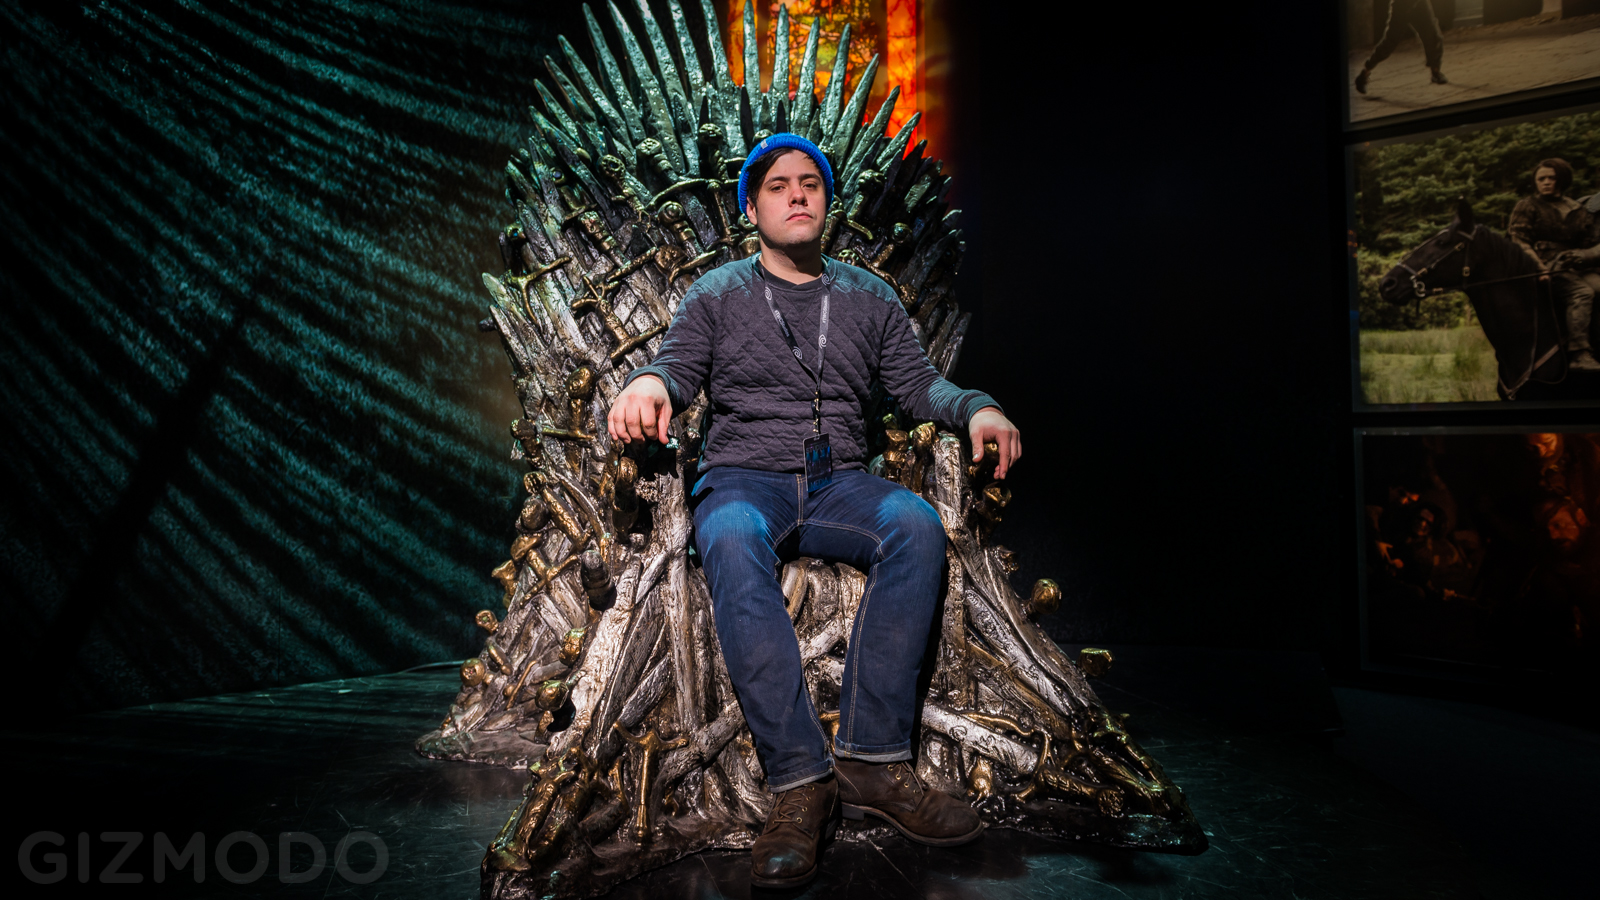 The Oculus Rift Put Me In Game Of Thrones And It Made My Stomach Drop